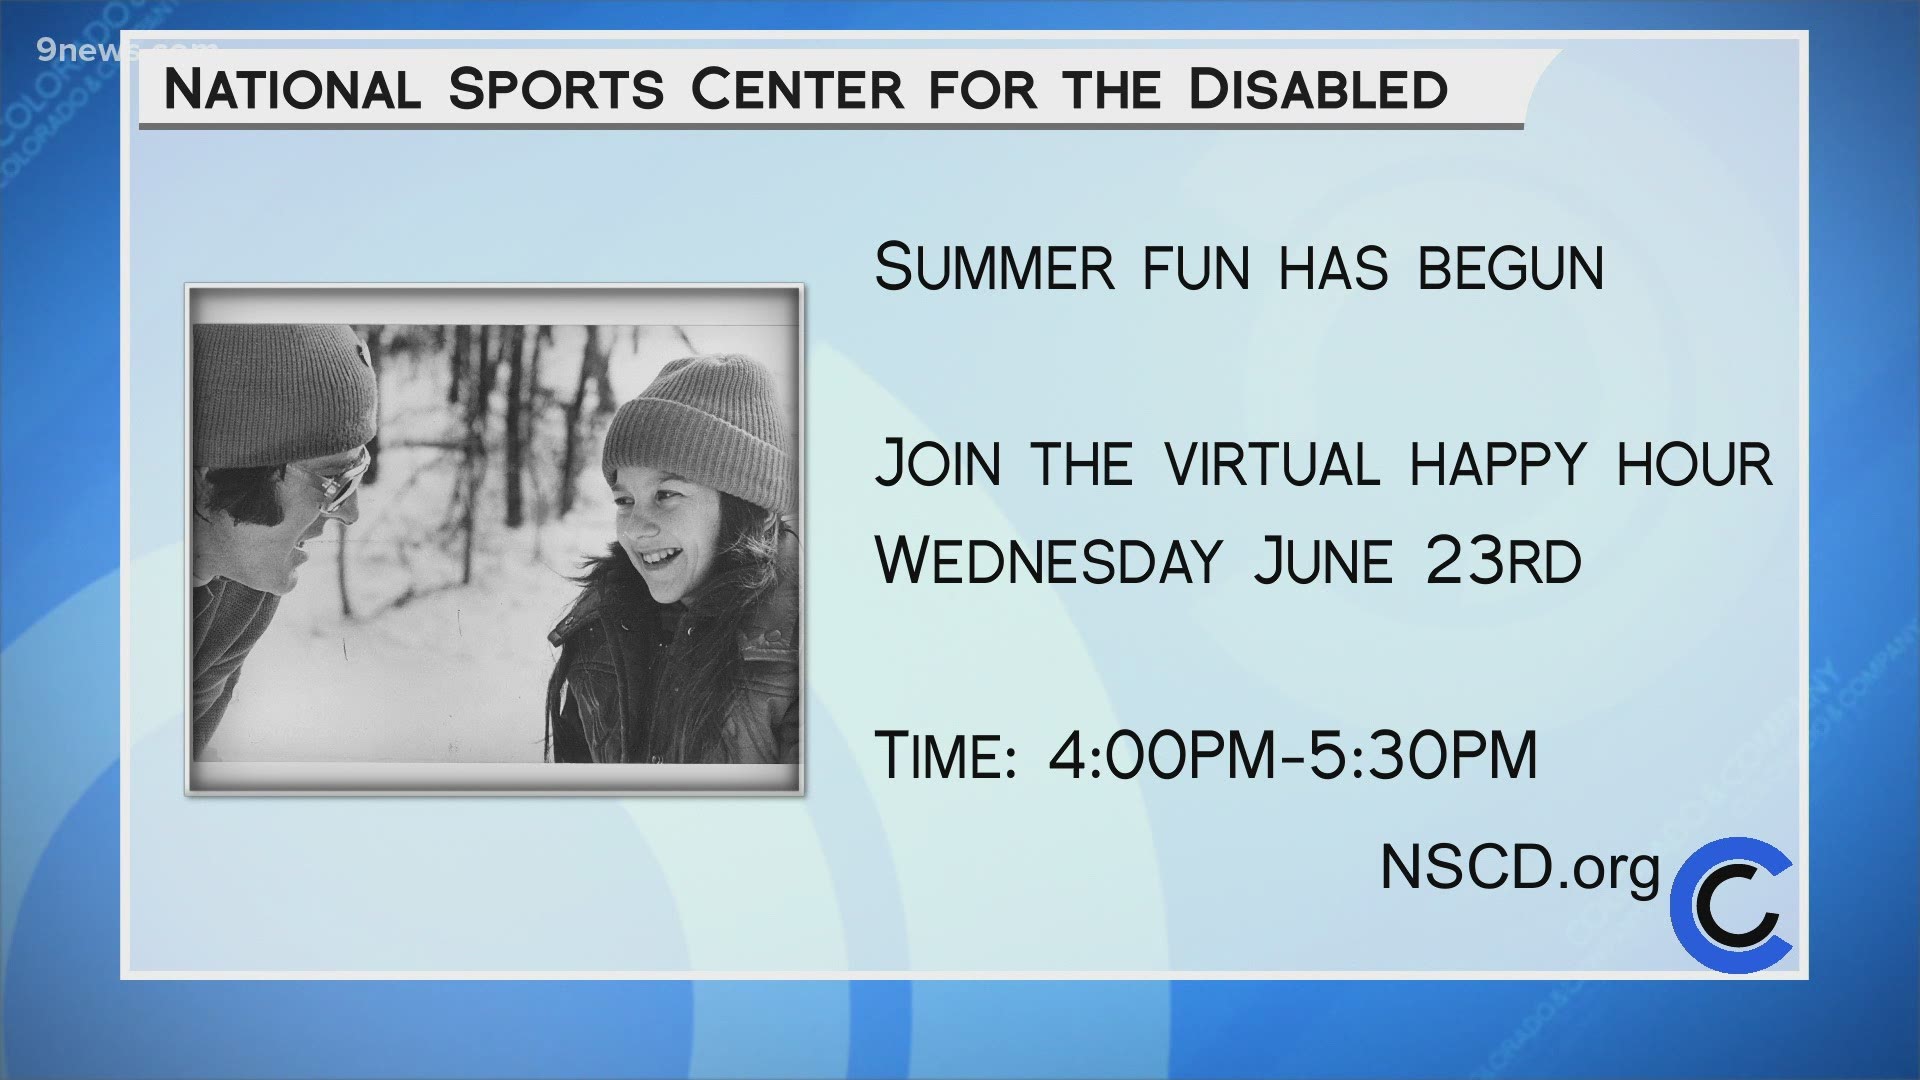 NSCD's Exceeding Boundaries fundraiser is a virtual happy hour happening on June 23 from 4 to 5:30PM. Learn more and register at NSCD.org.